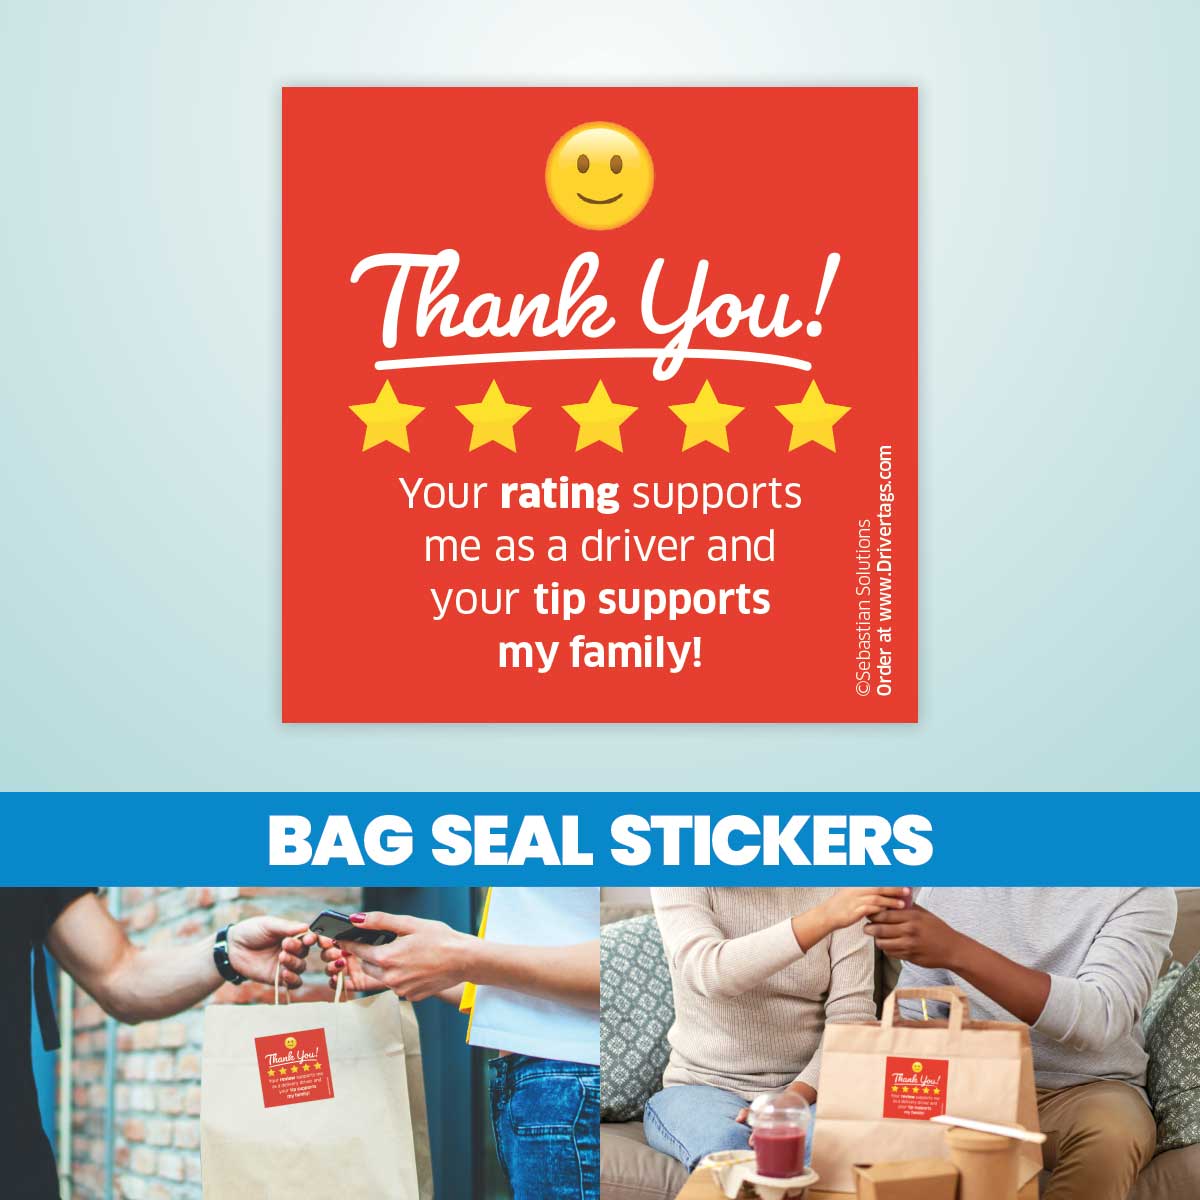 Bag Seal Stickers